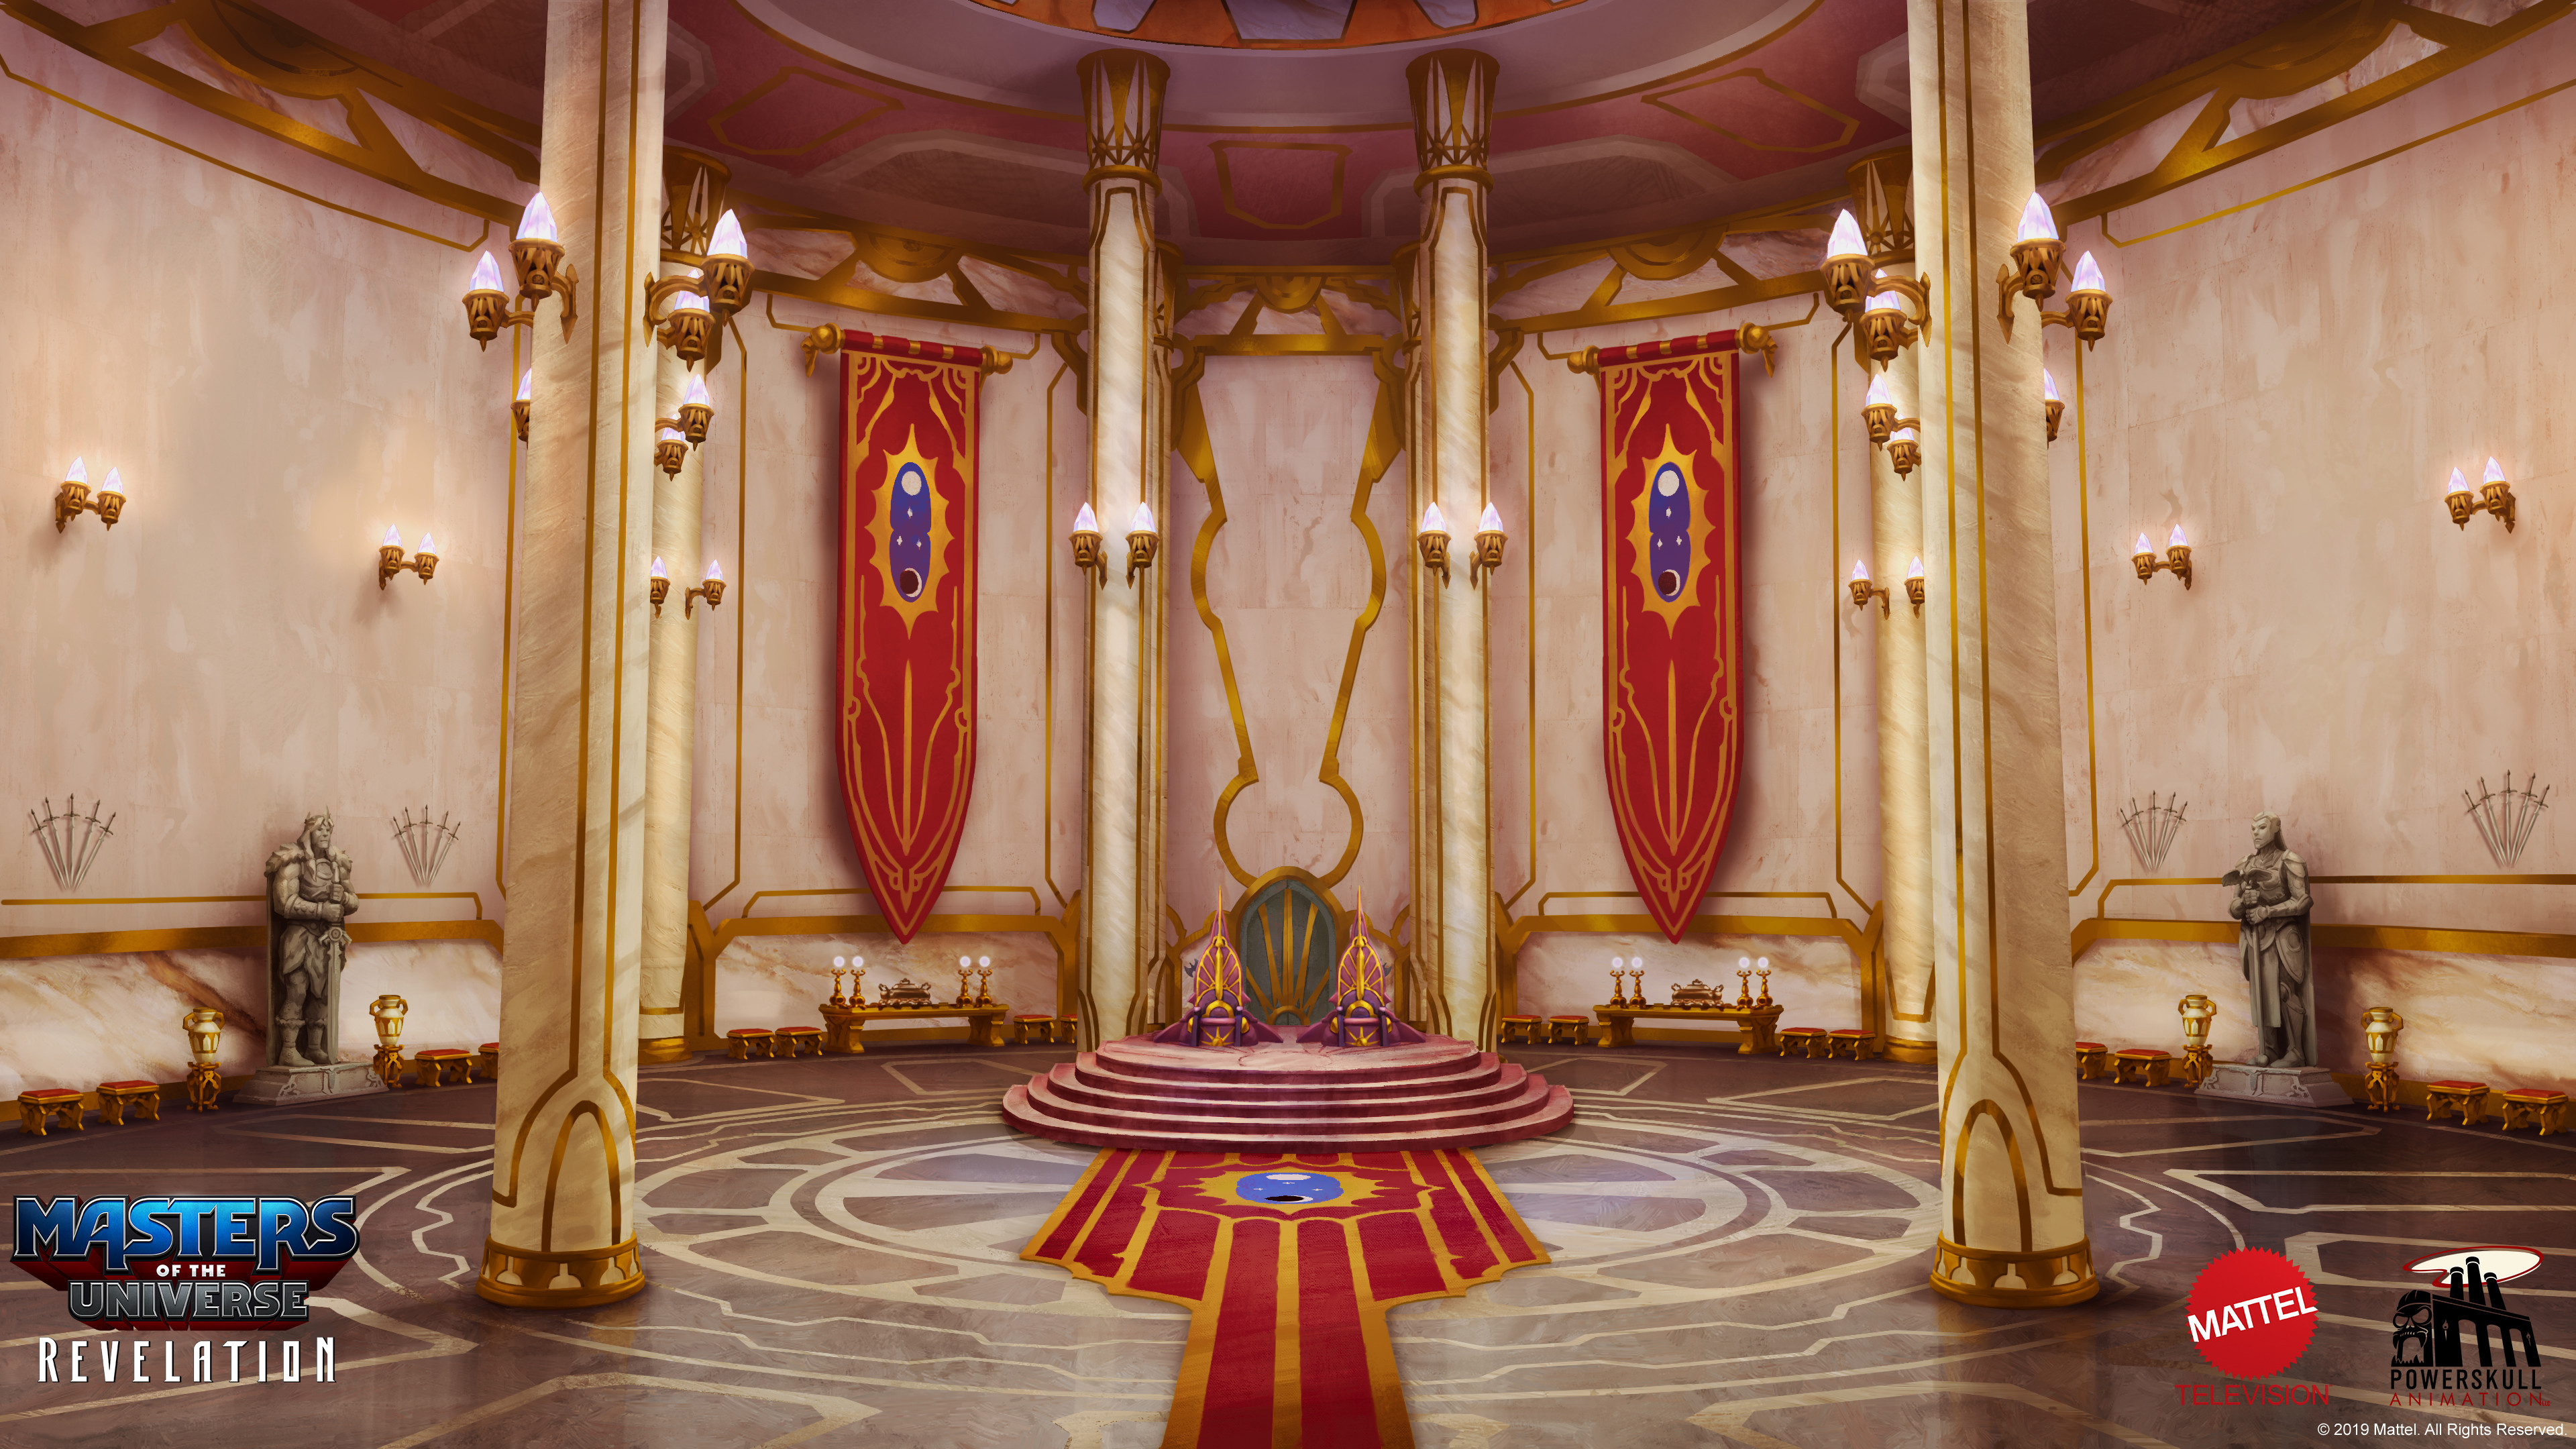 The Royal Palace Throne Room by Pedro H. Cardoso